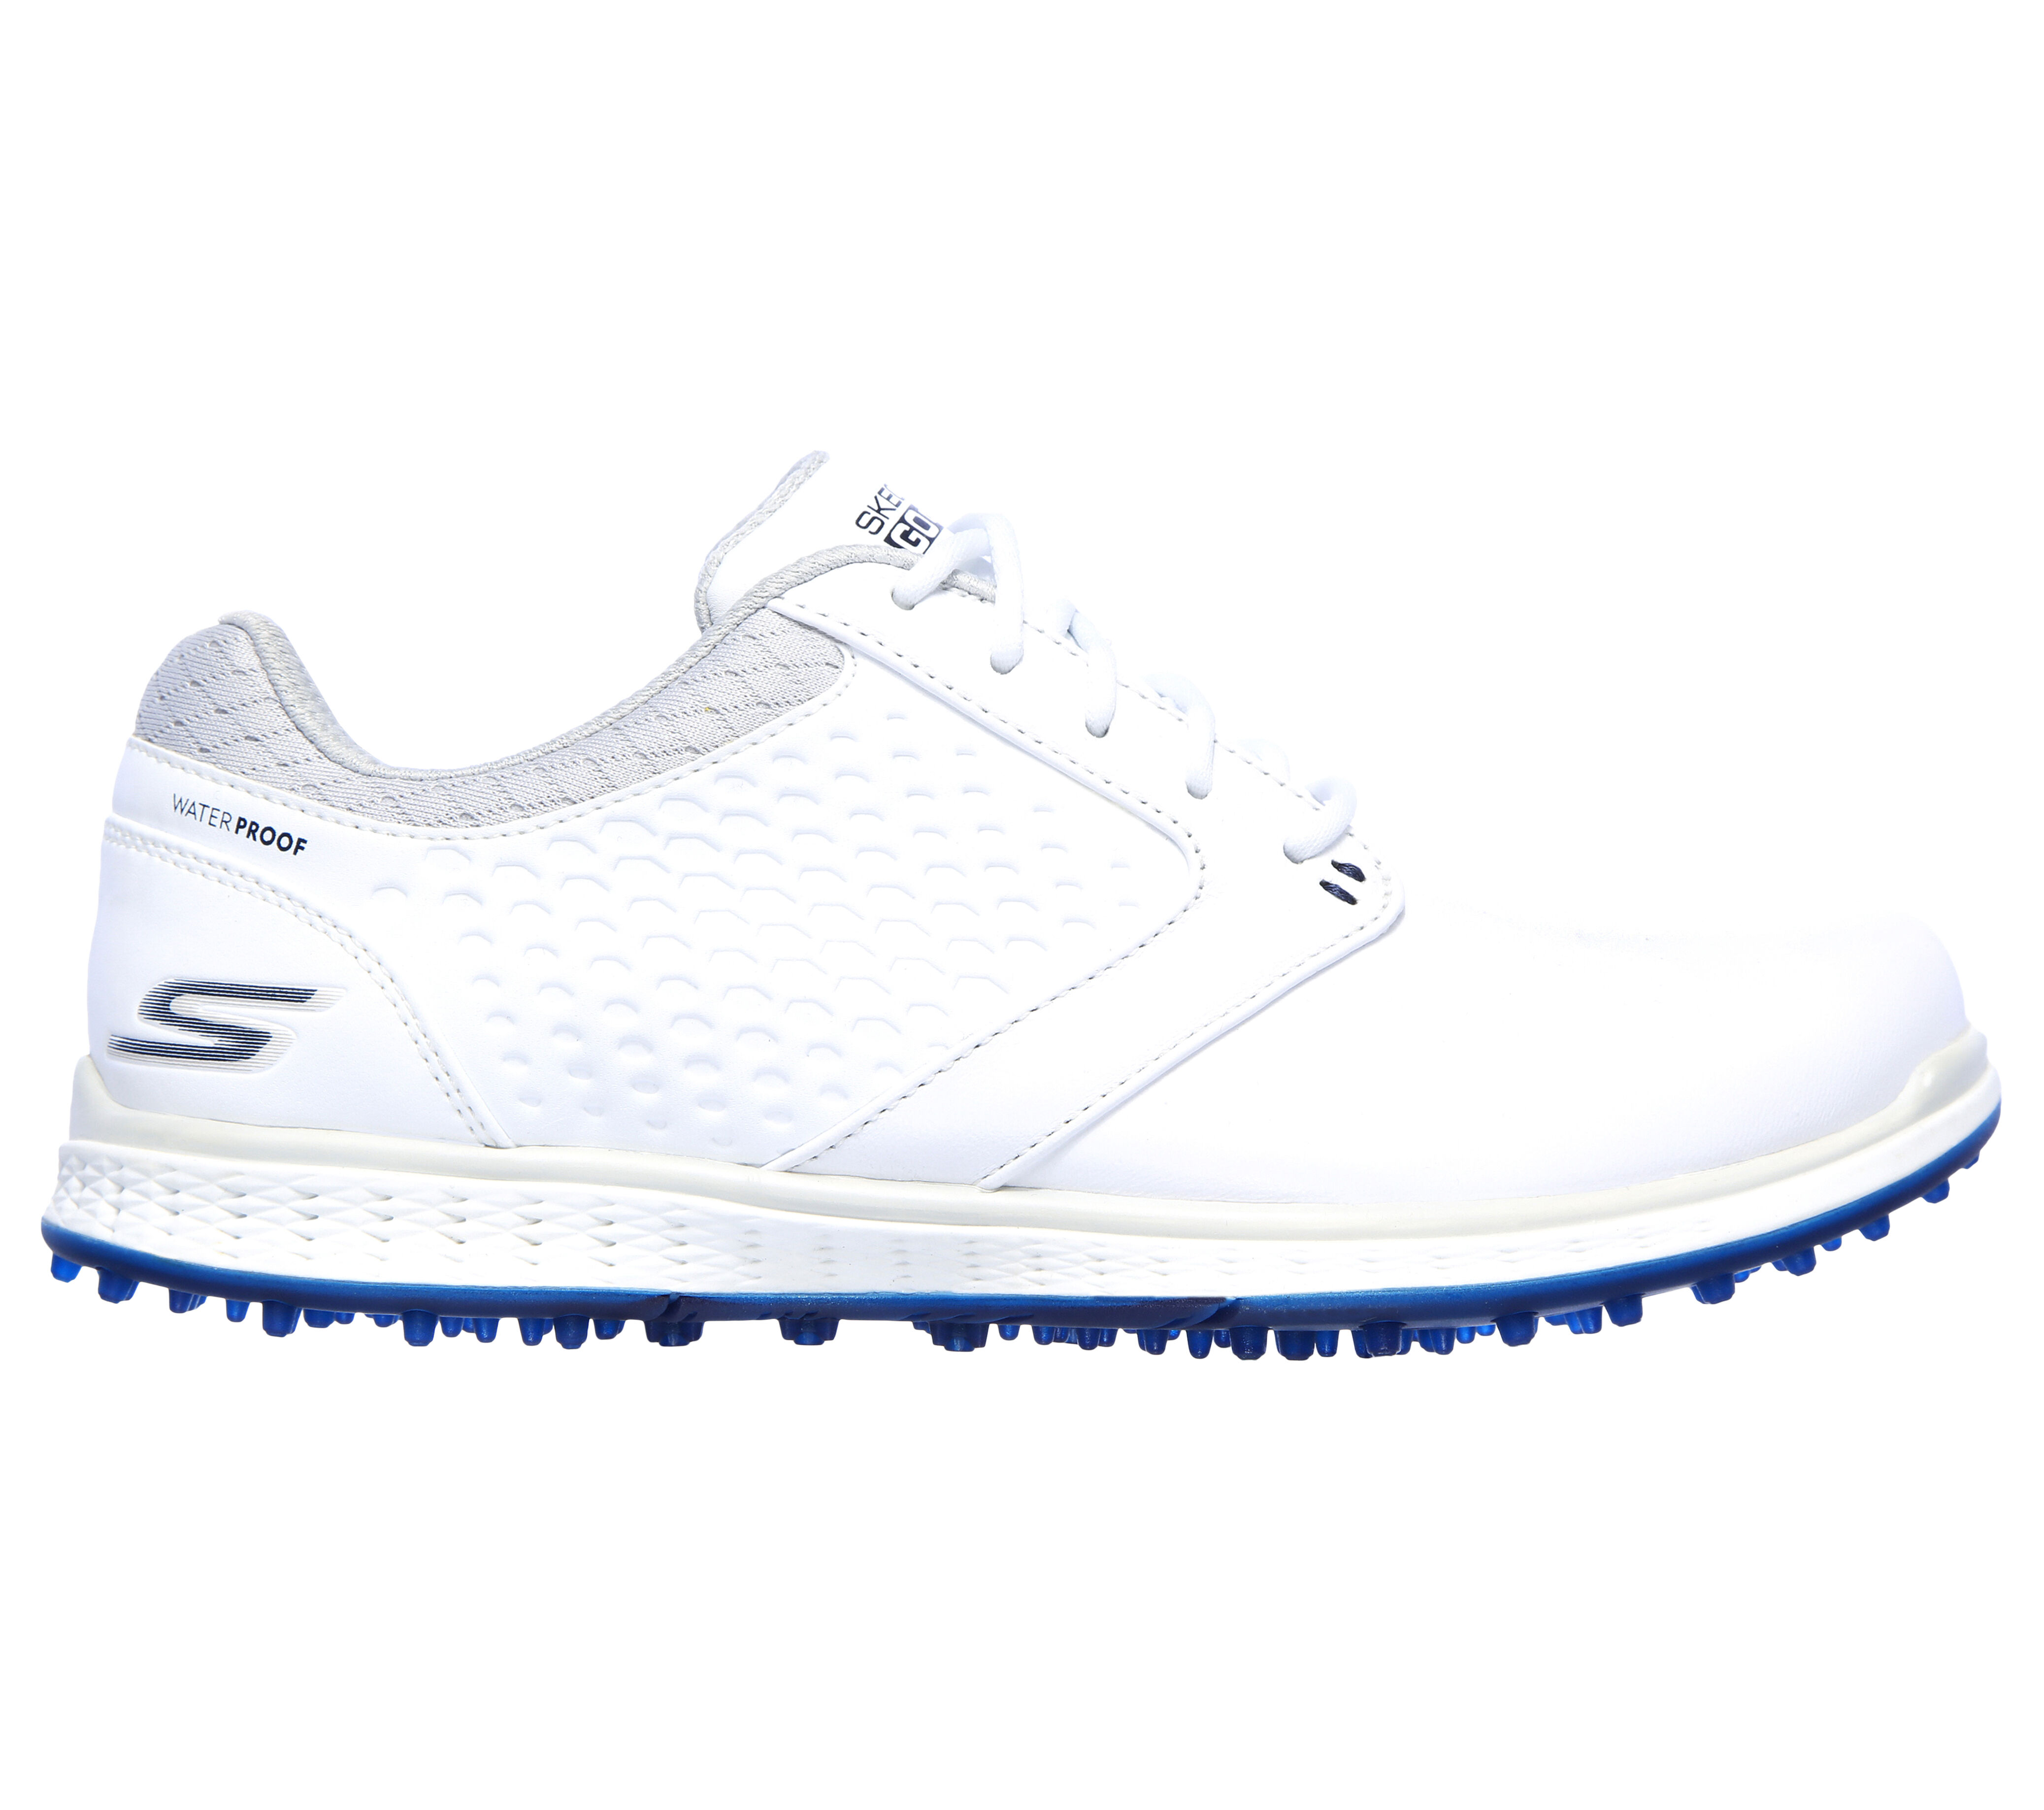 skechers golf shoes portugal